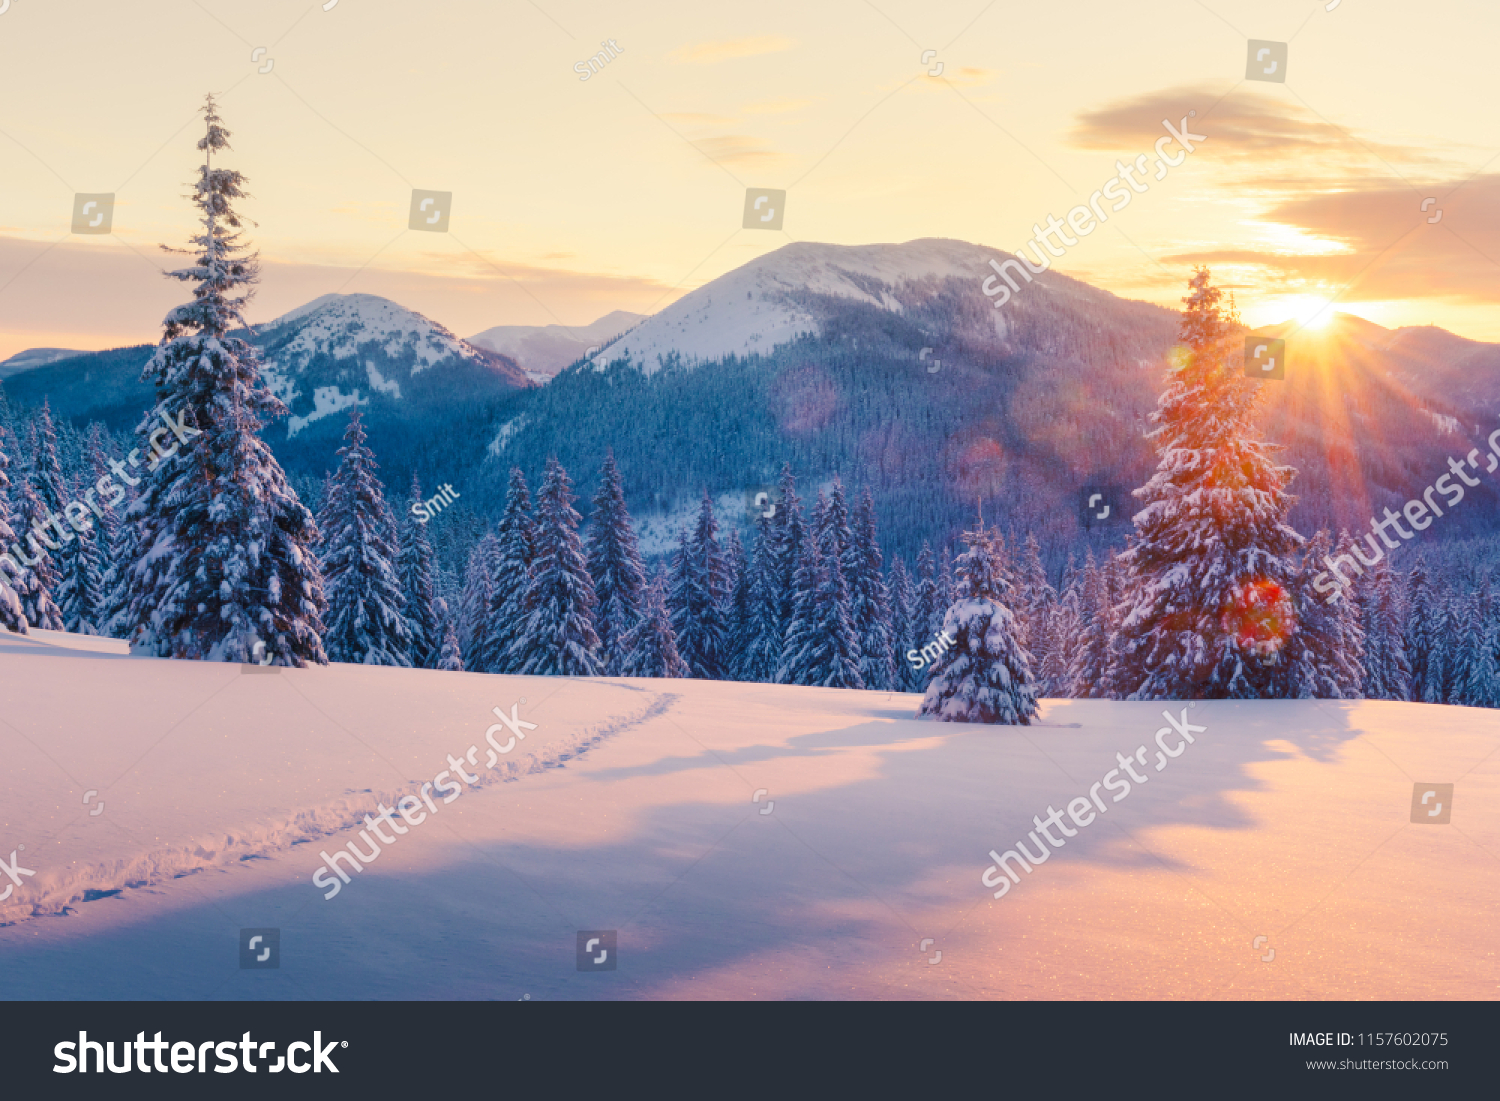 Fantastic orange winter landscape in snowy mountains glowing by sunlight. Dramatic wintry scene with snowy trees. Christmas holiday concept. Carpathians mountain, Ukraine, Europe #1157602075